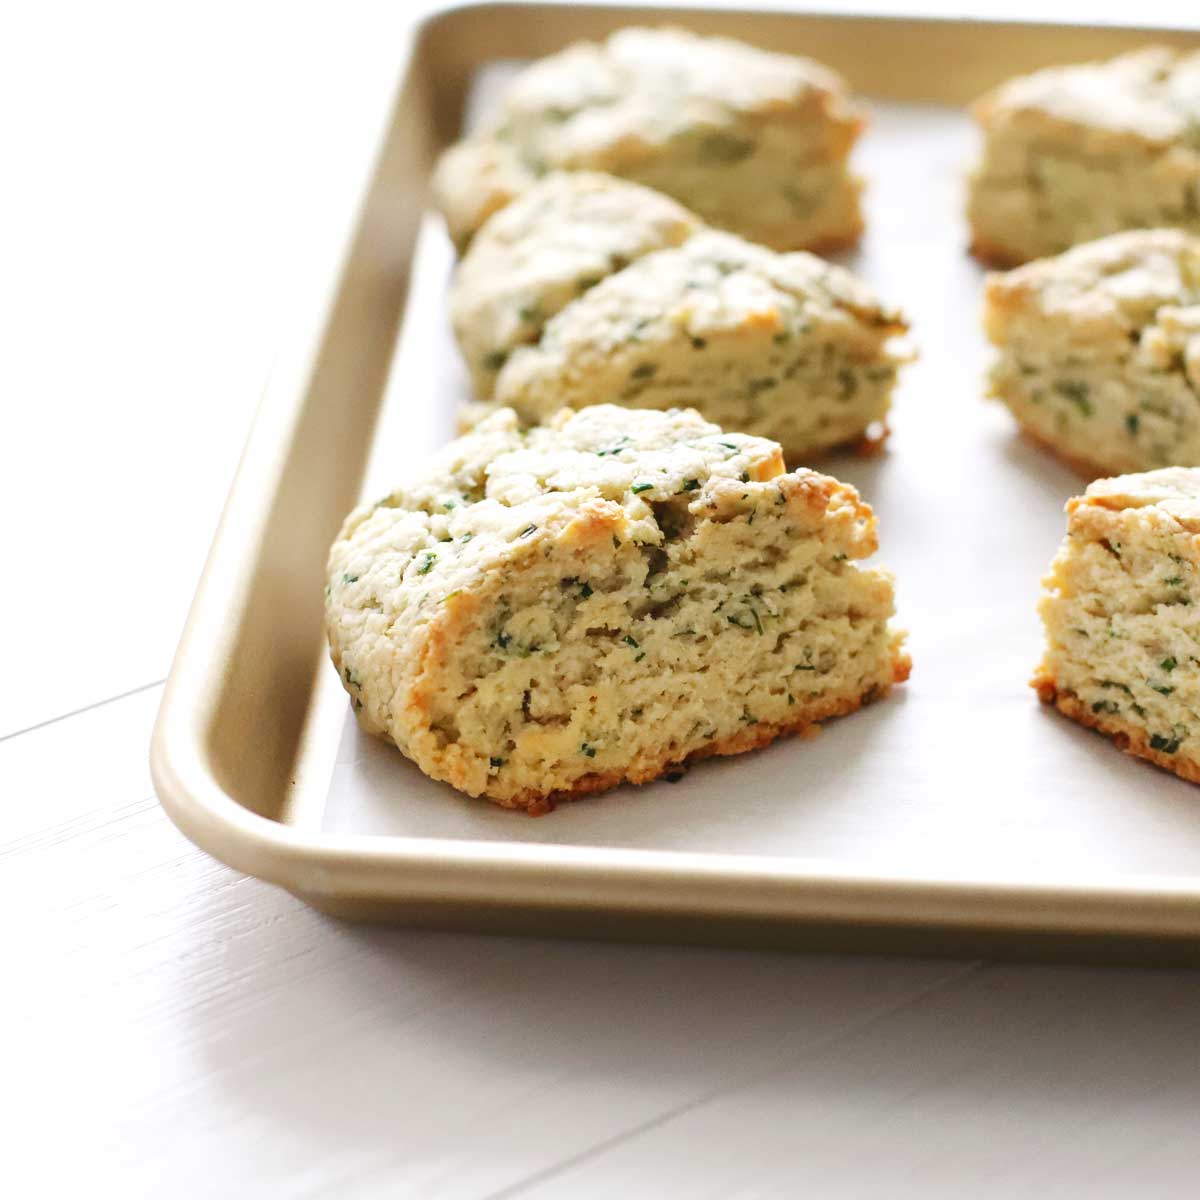 Savory and Delicious! Potato & Chives Scones (No Butter, Vegan Recipe) - white bean paste cookies